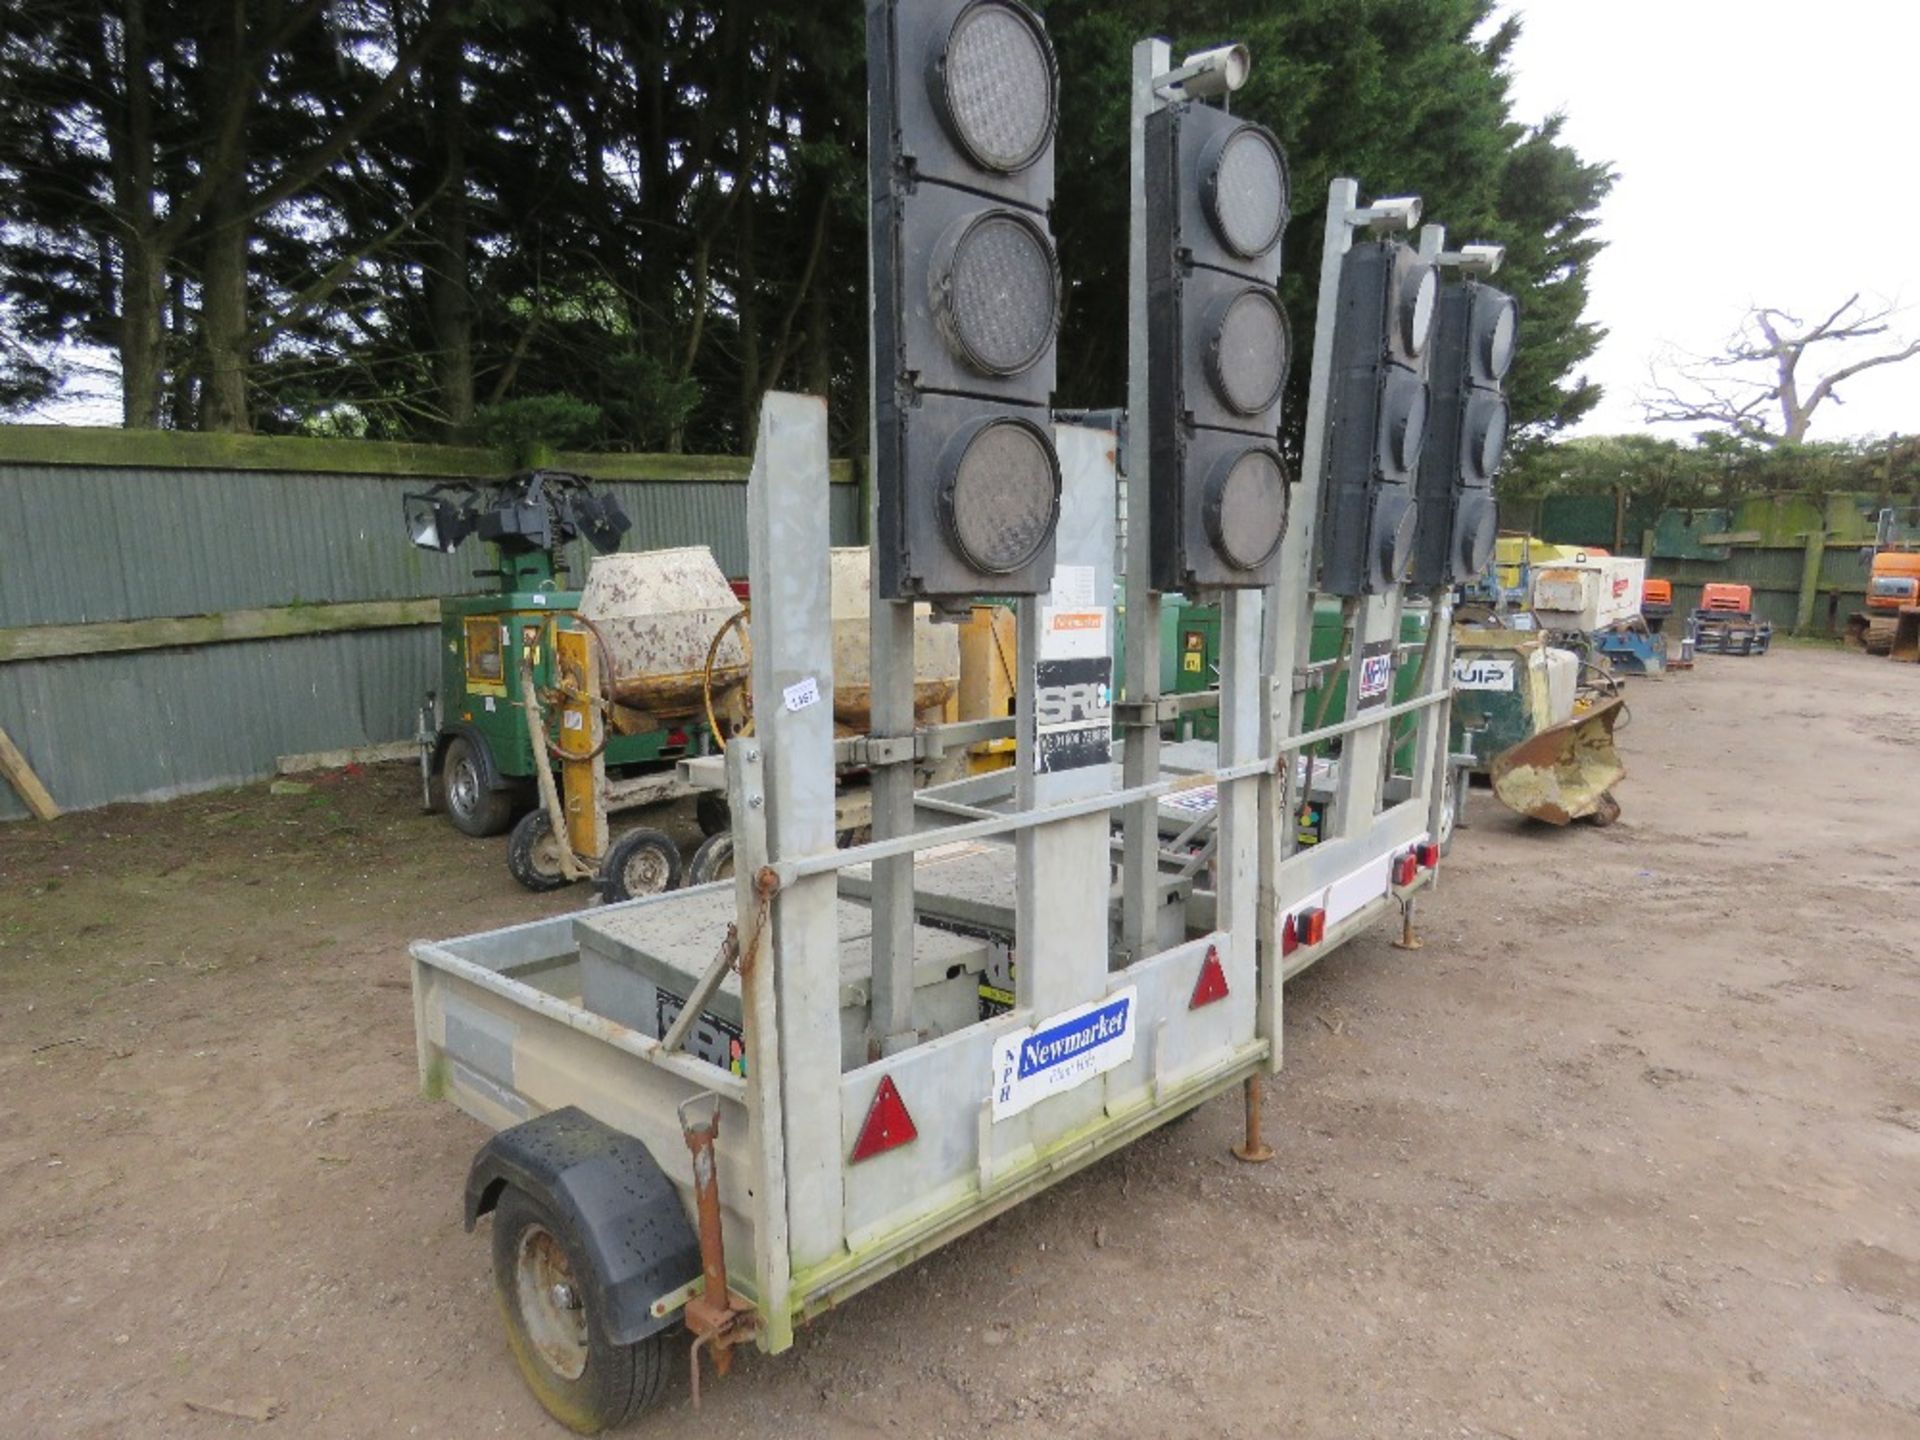 TRAFFIC LIGHT TRAILER AND LIGHTS (NO BATTERIES) INCLUDING A CHARGER UNIT.